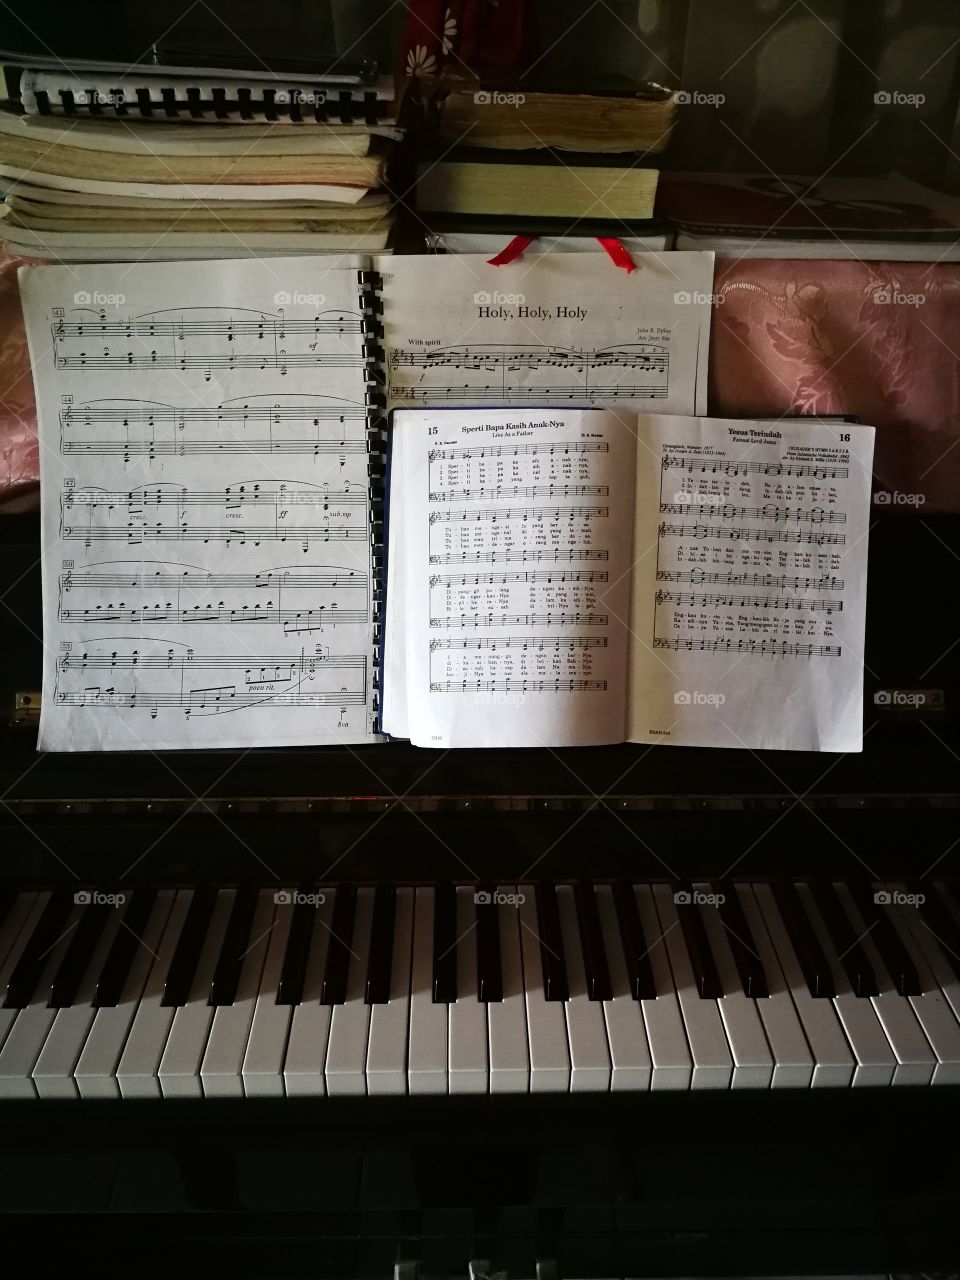 Study playing piano is another goal for me in 2019 to play better.